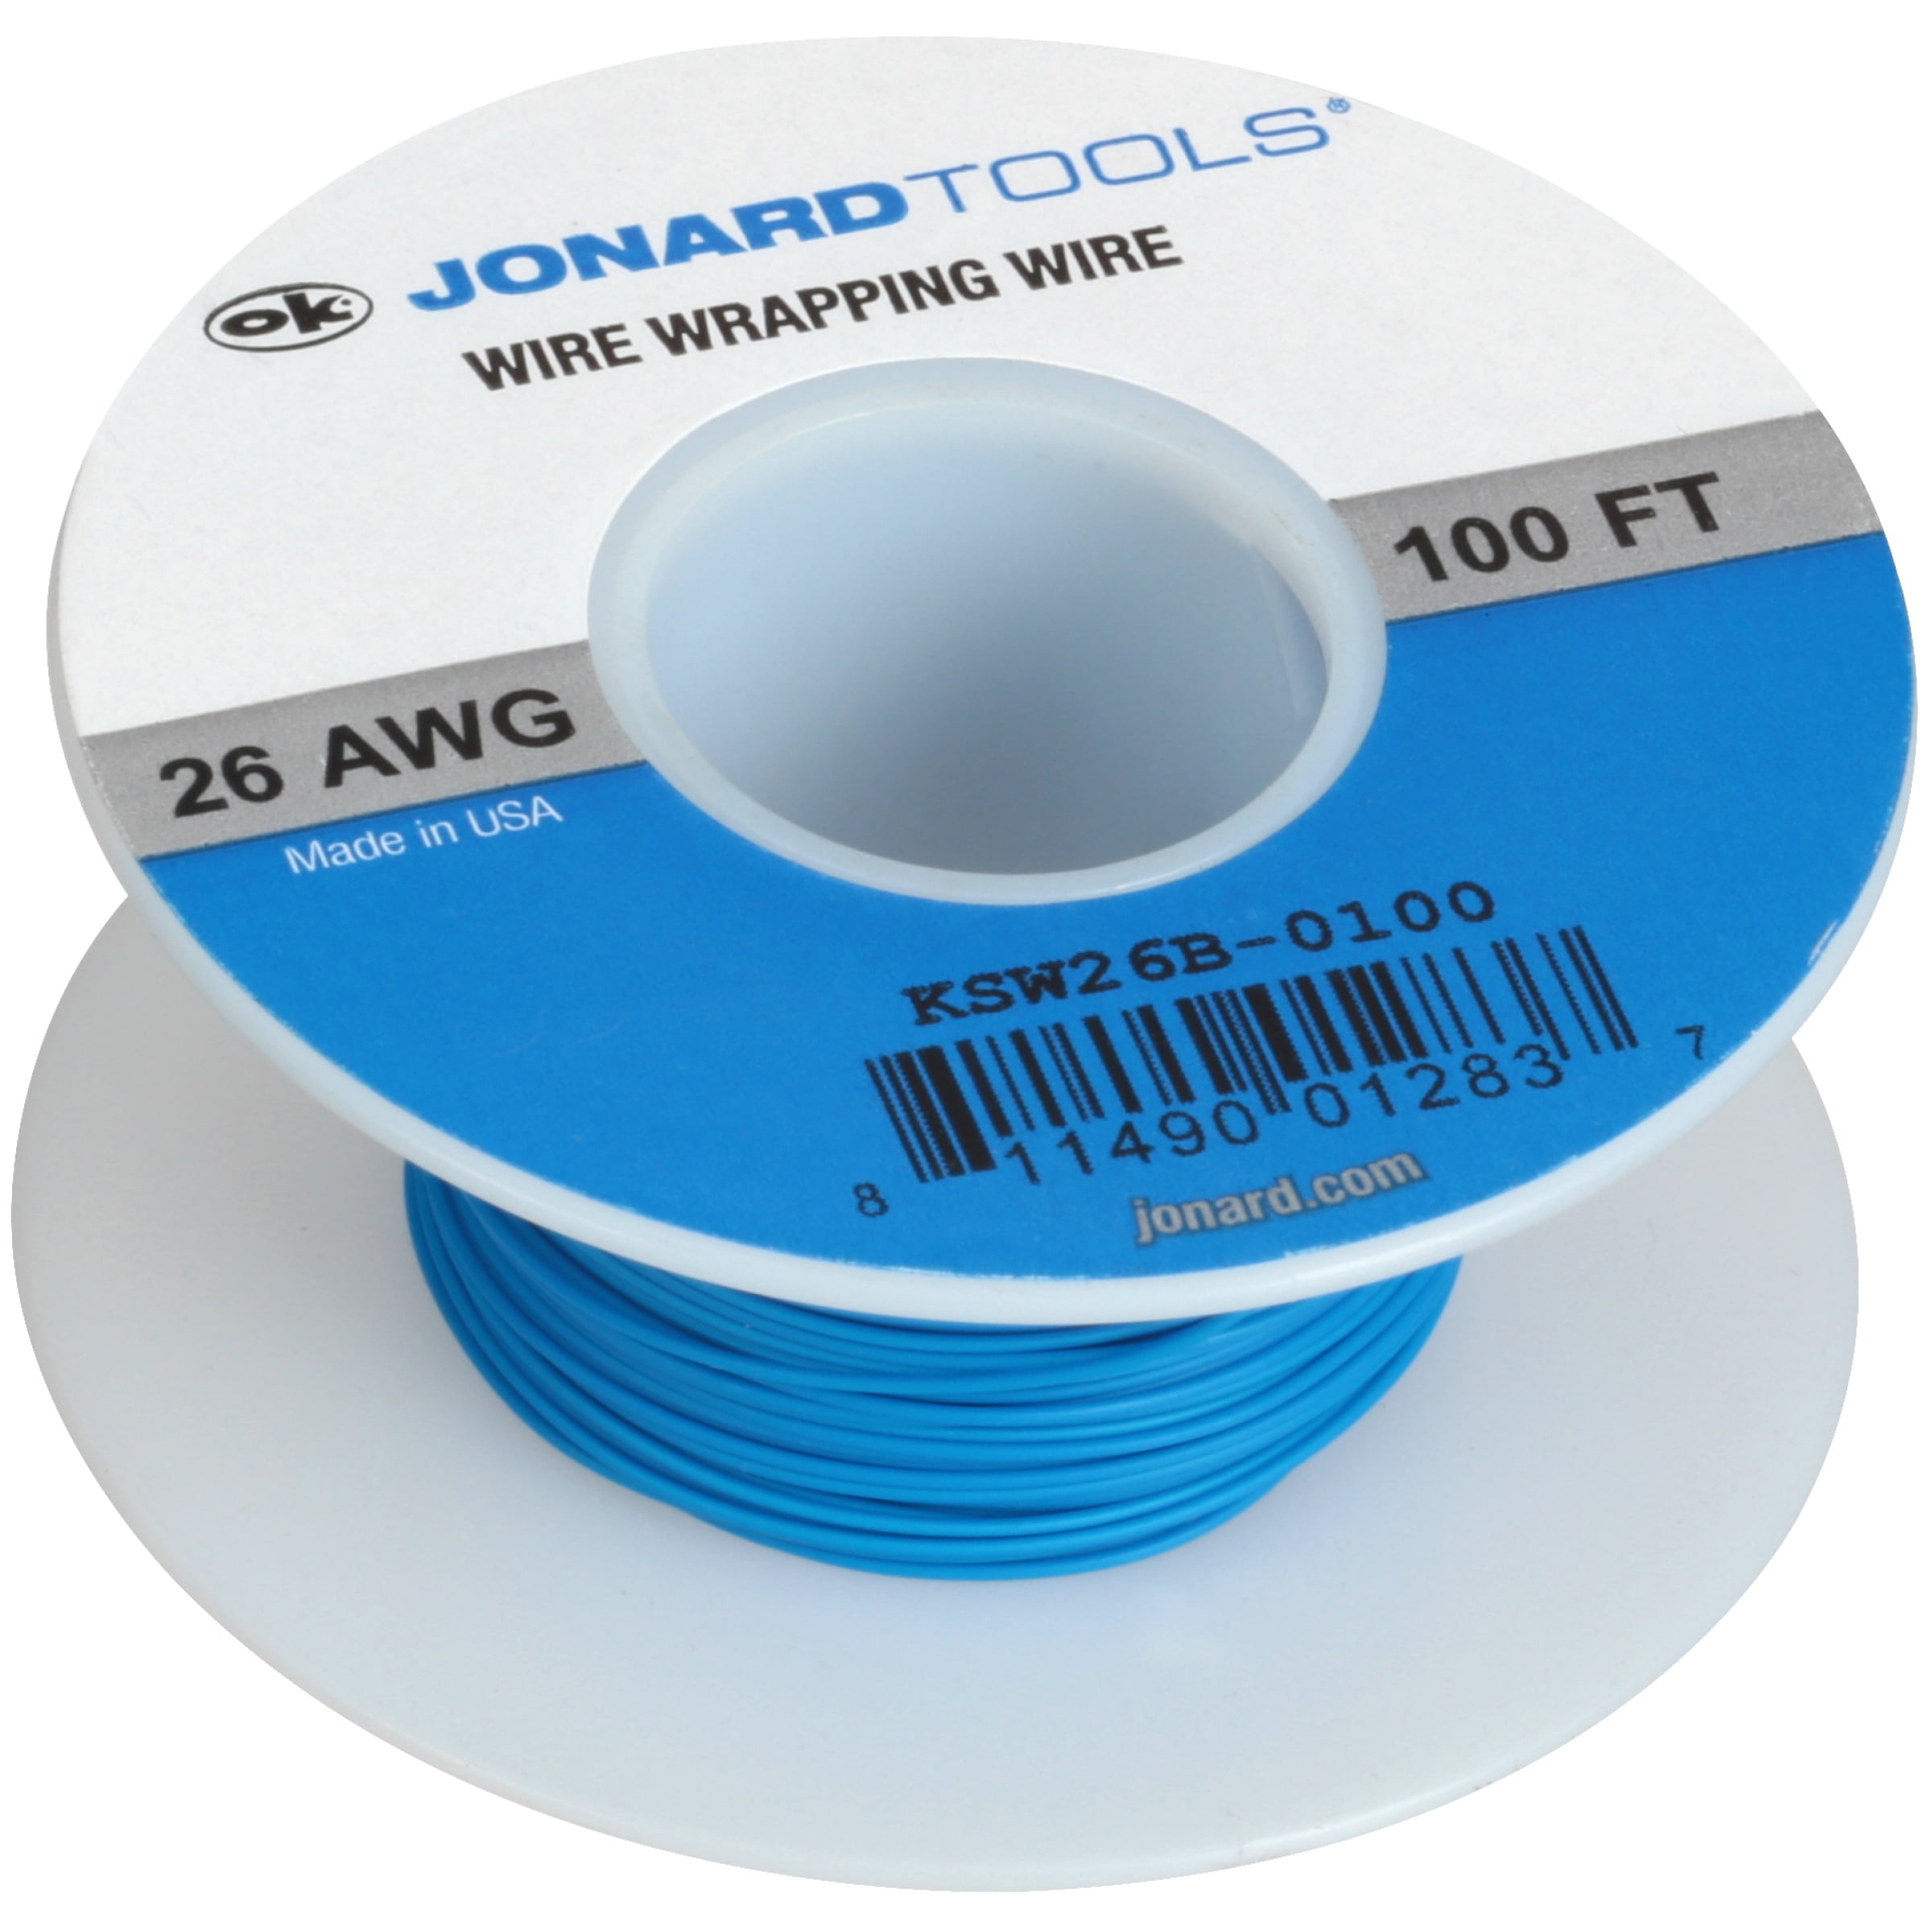 Ok Industries KSW26B-0100 26 AWG Wire Wrapping Wire 100 ft. Bl